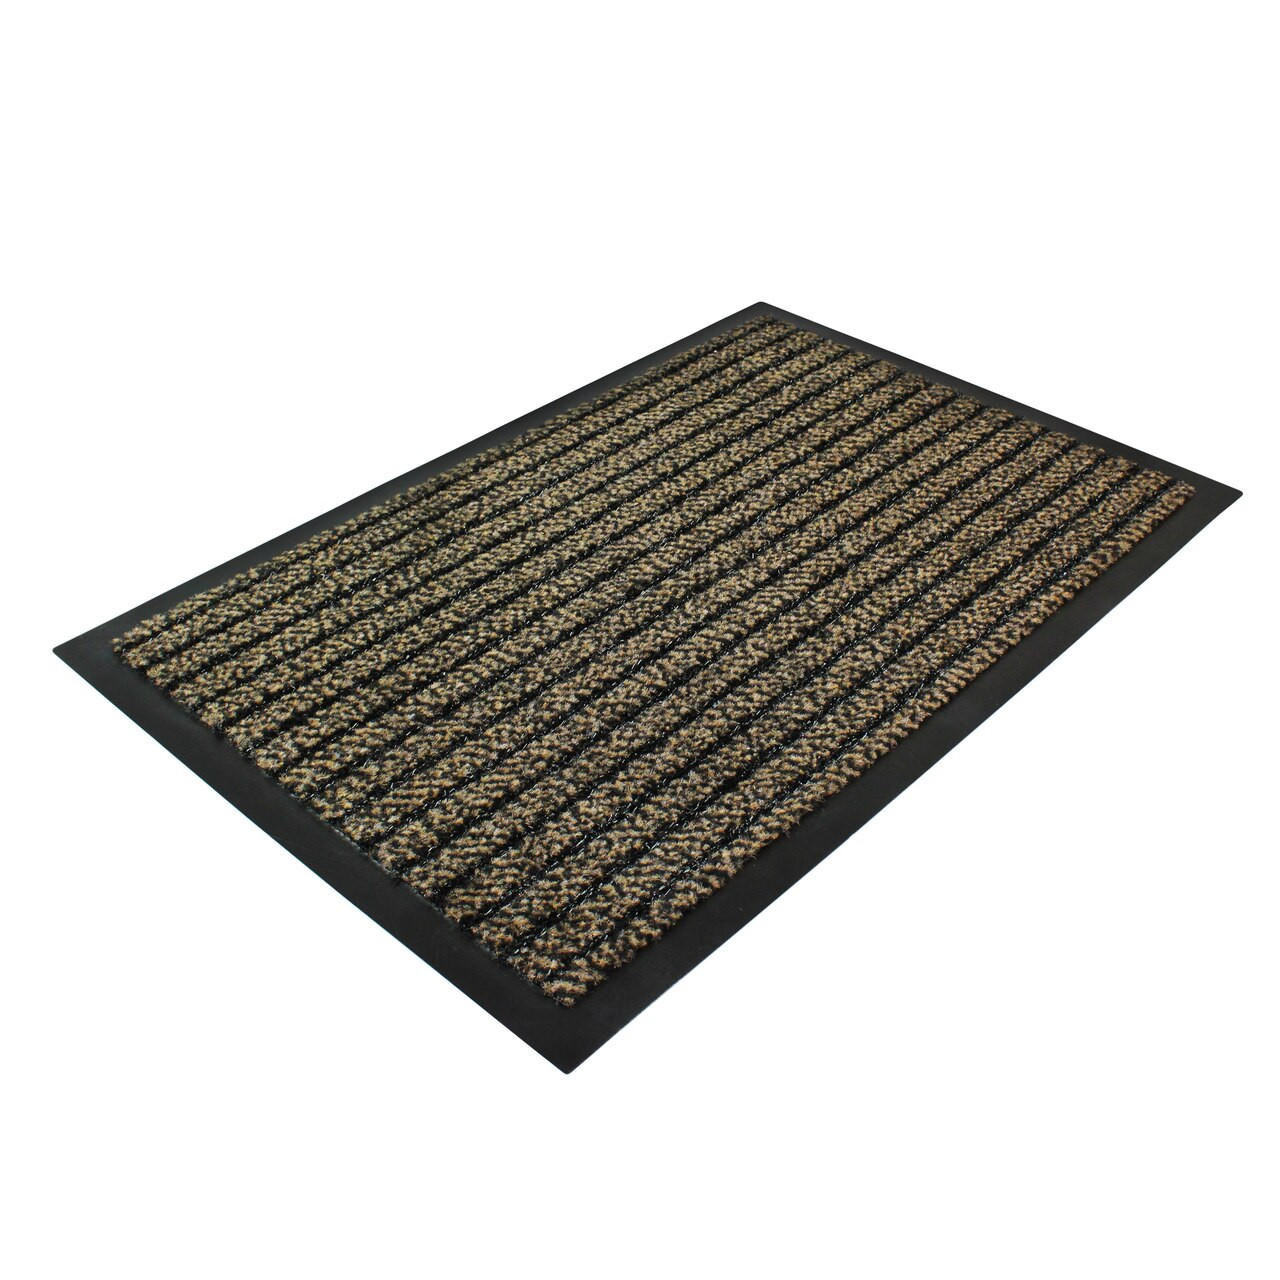 https://cdn11.bigcommerce.com/s-fjwps1jbkv/images/stencil/1280x1280/products/149/3995/ultralux-scraper-entrance-mat-or-polypropylene-fibers-and-anti-slip-vinyl-backed-indoor-entry-rug-doormat-or-brown__17227.1689079907.jpg?c=2?imbypass=on